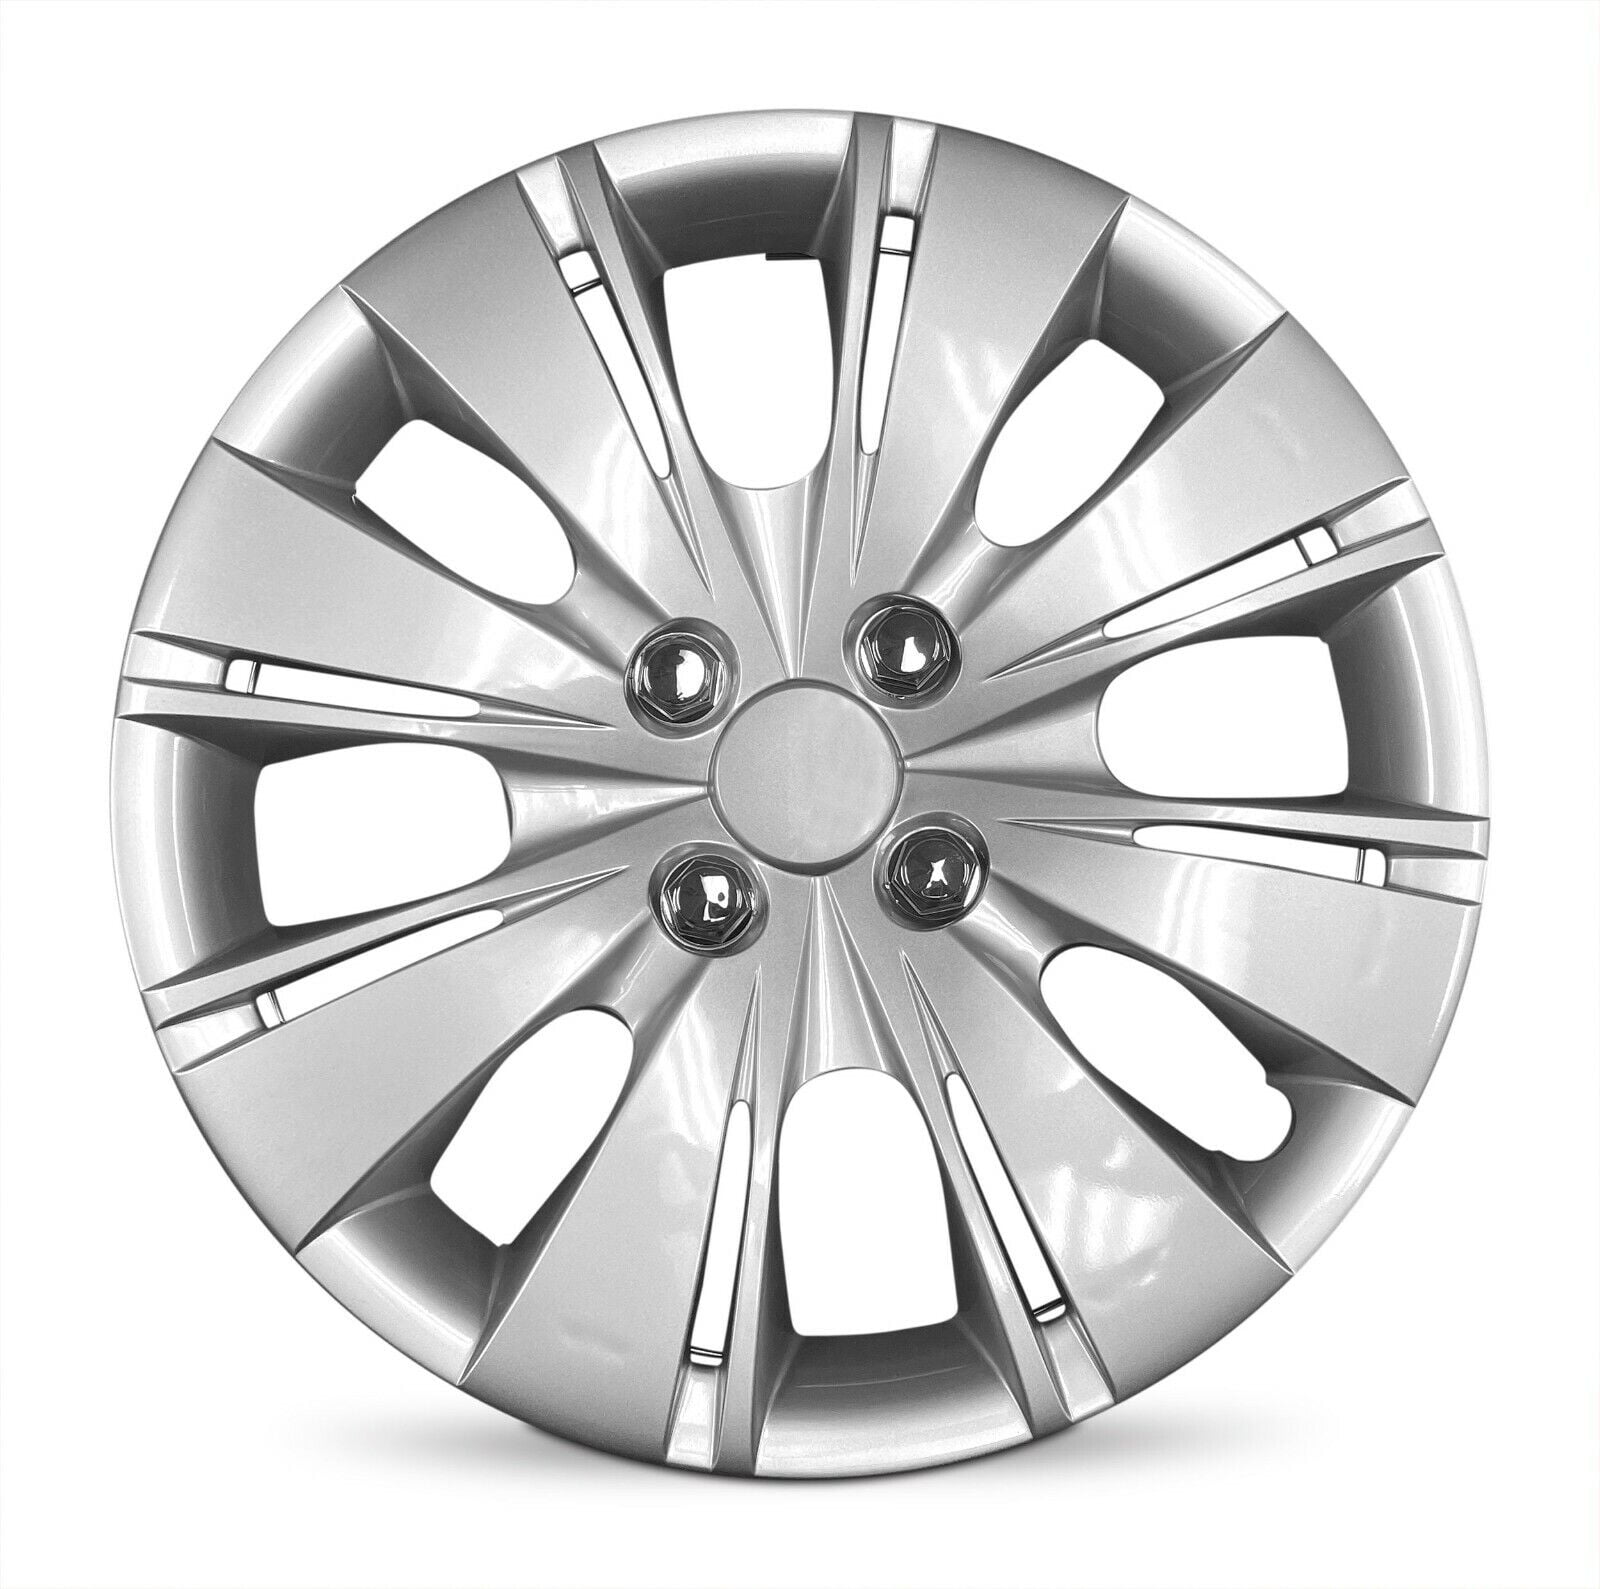 Heavy Duty Construction ONE Single Hubcap Hubcaps.com Premium Quality 15 Silver Hubcap/Wheel Cover fits Toyota Yaris 